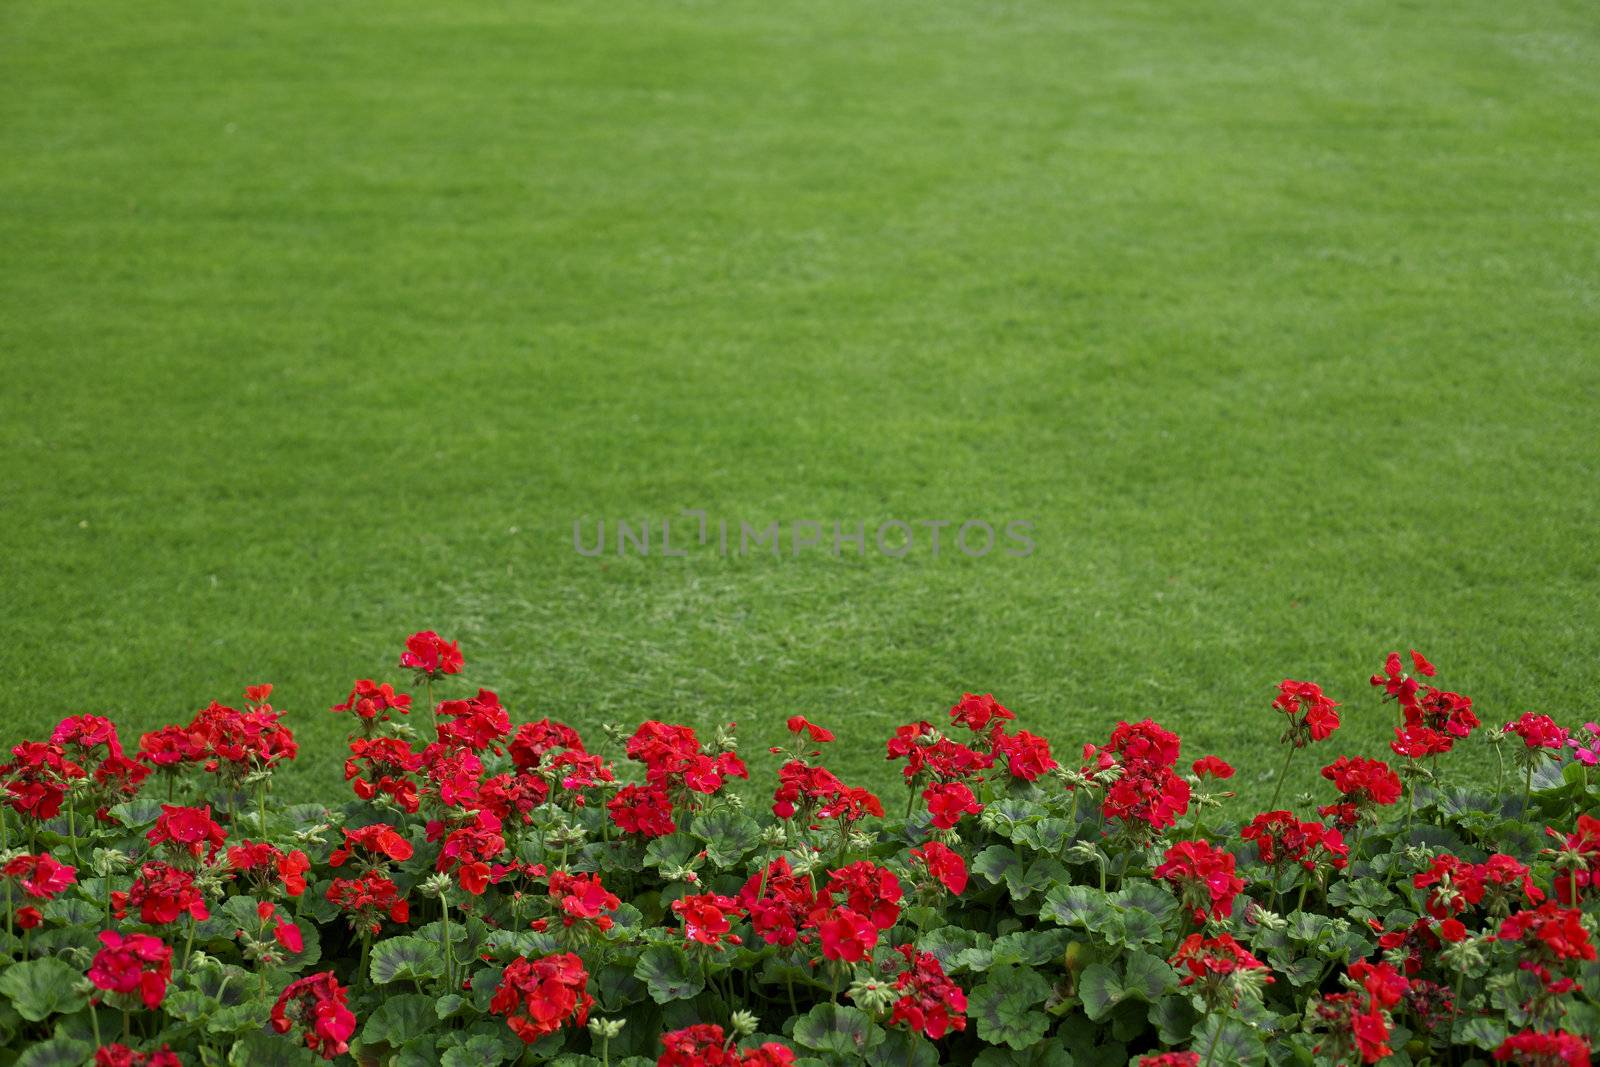 lawn with red geraniums in the foreground
